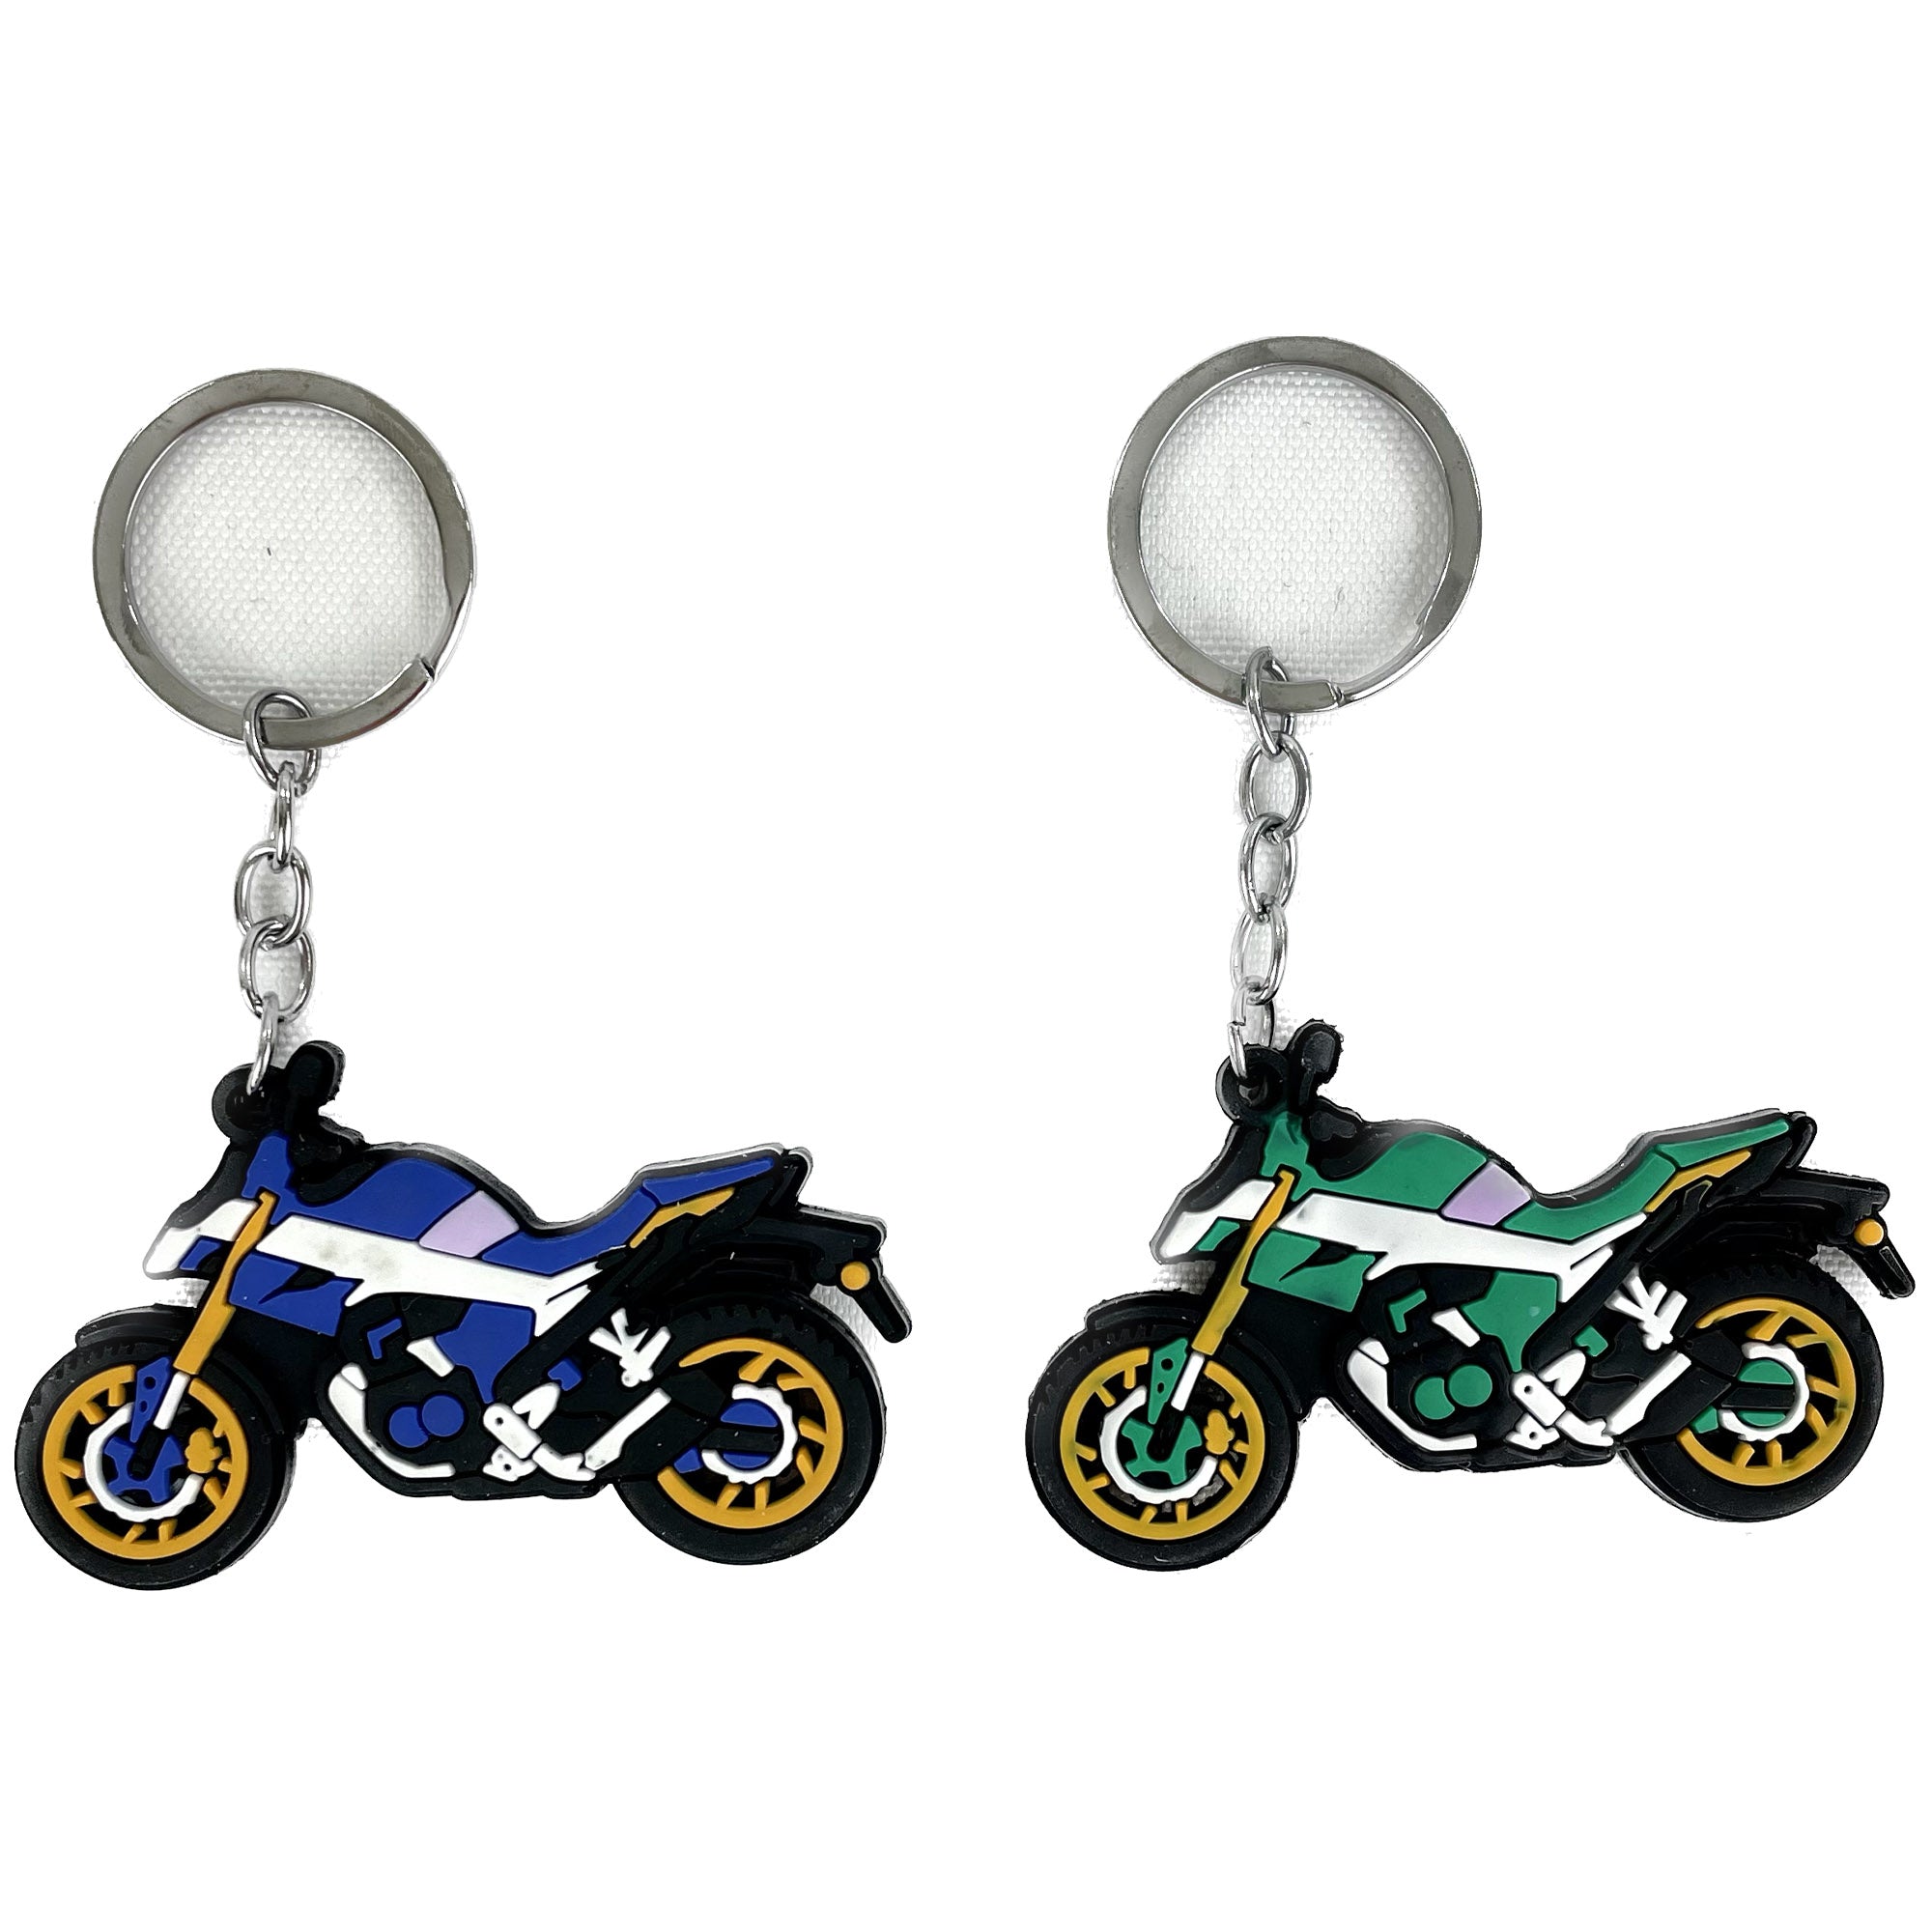 MOTORCYCLE KEY CHAIN 21104-32 (12PC)